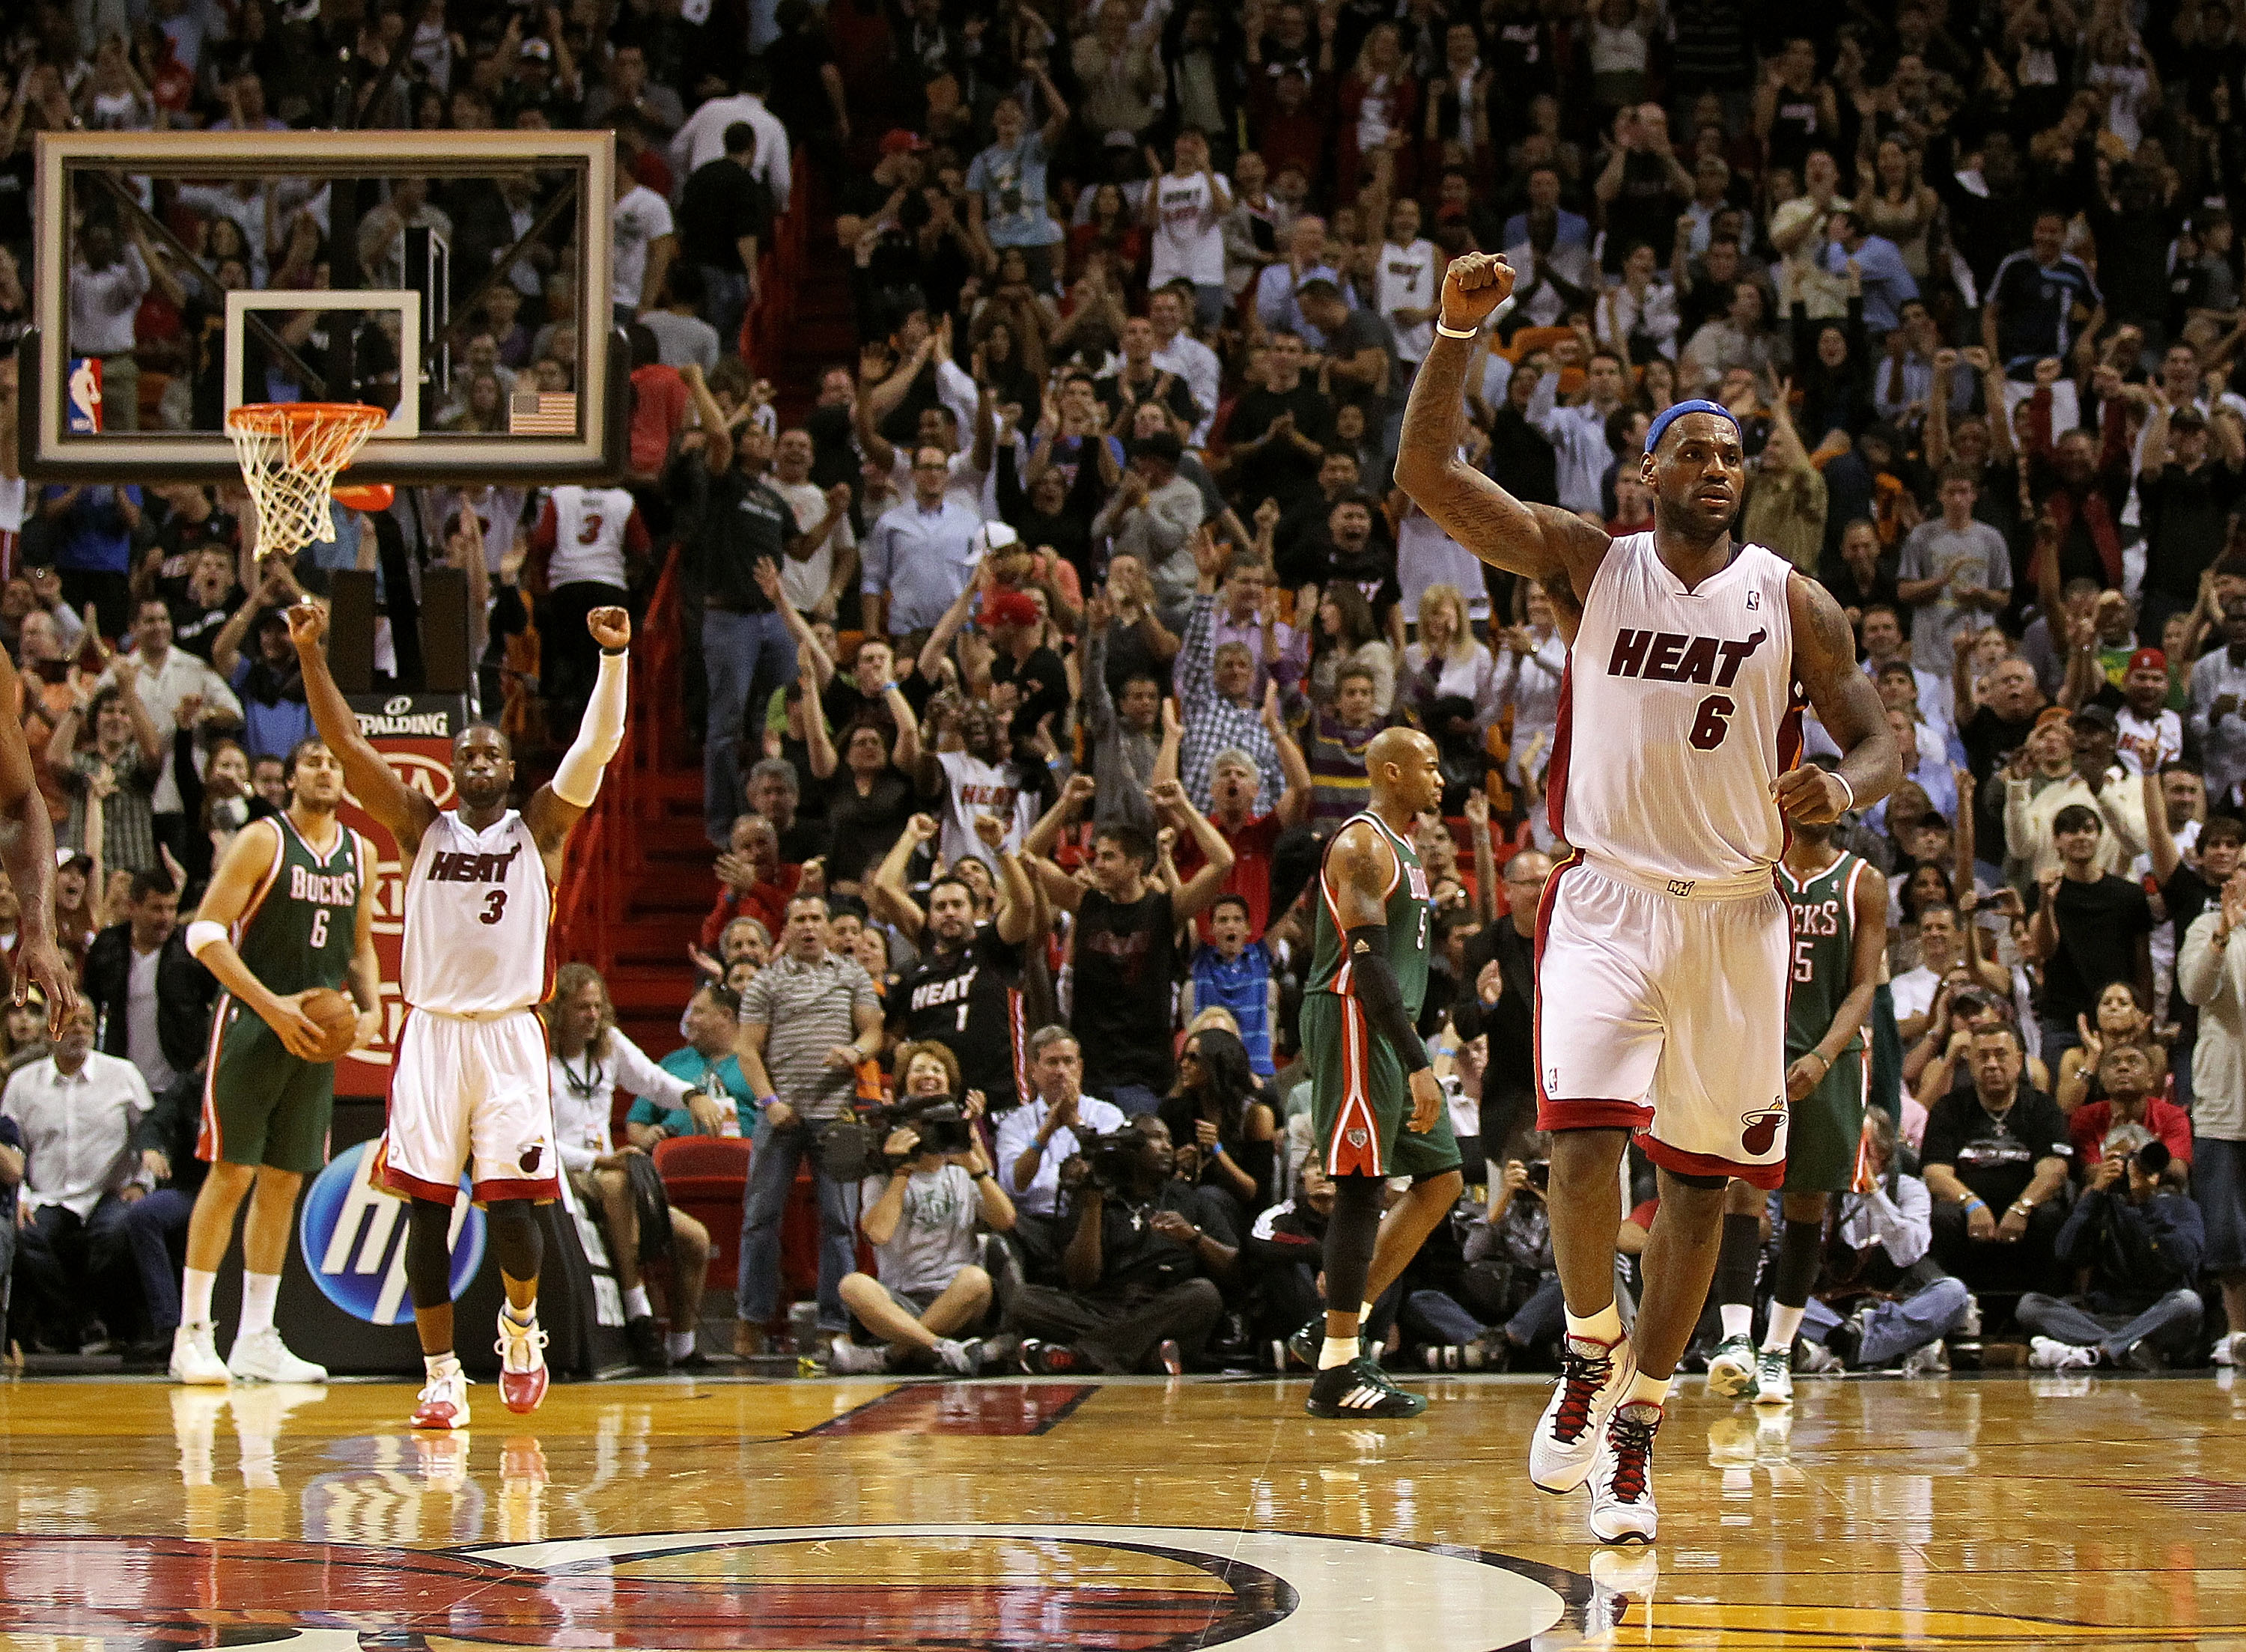 MIAMI, FL - JANUARY 04:  LeBron James #6 of the Miami Heat reacts after Mario Chalmers #15 hit a 3 pointer late in the game against the Milwaukee Bucks at American Airlines Arena on January 4, 2011 in Miami, Florida. NOTE TO USER: User expressly acknowled